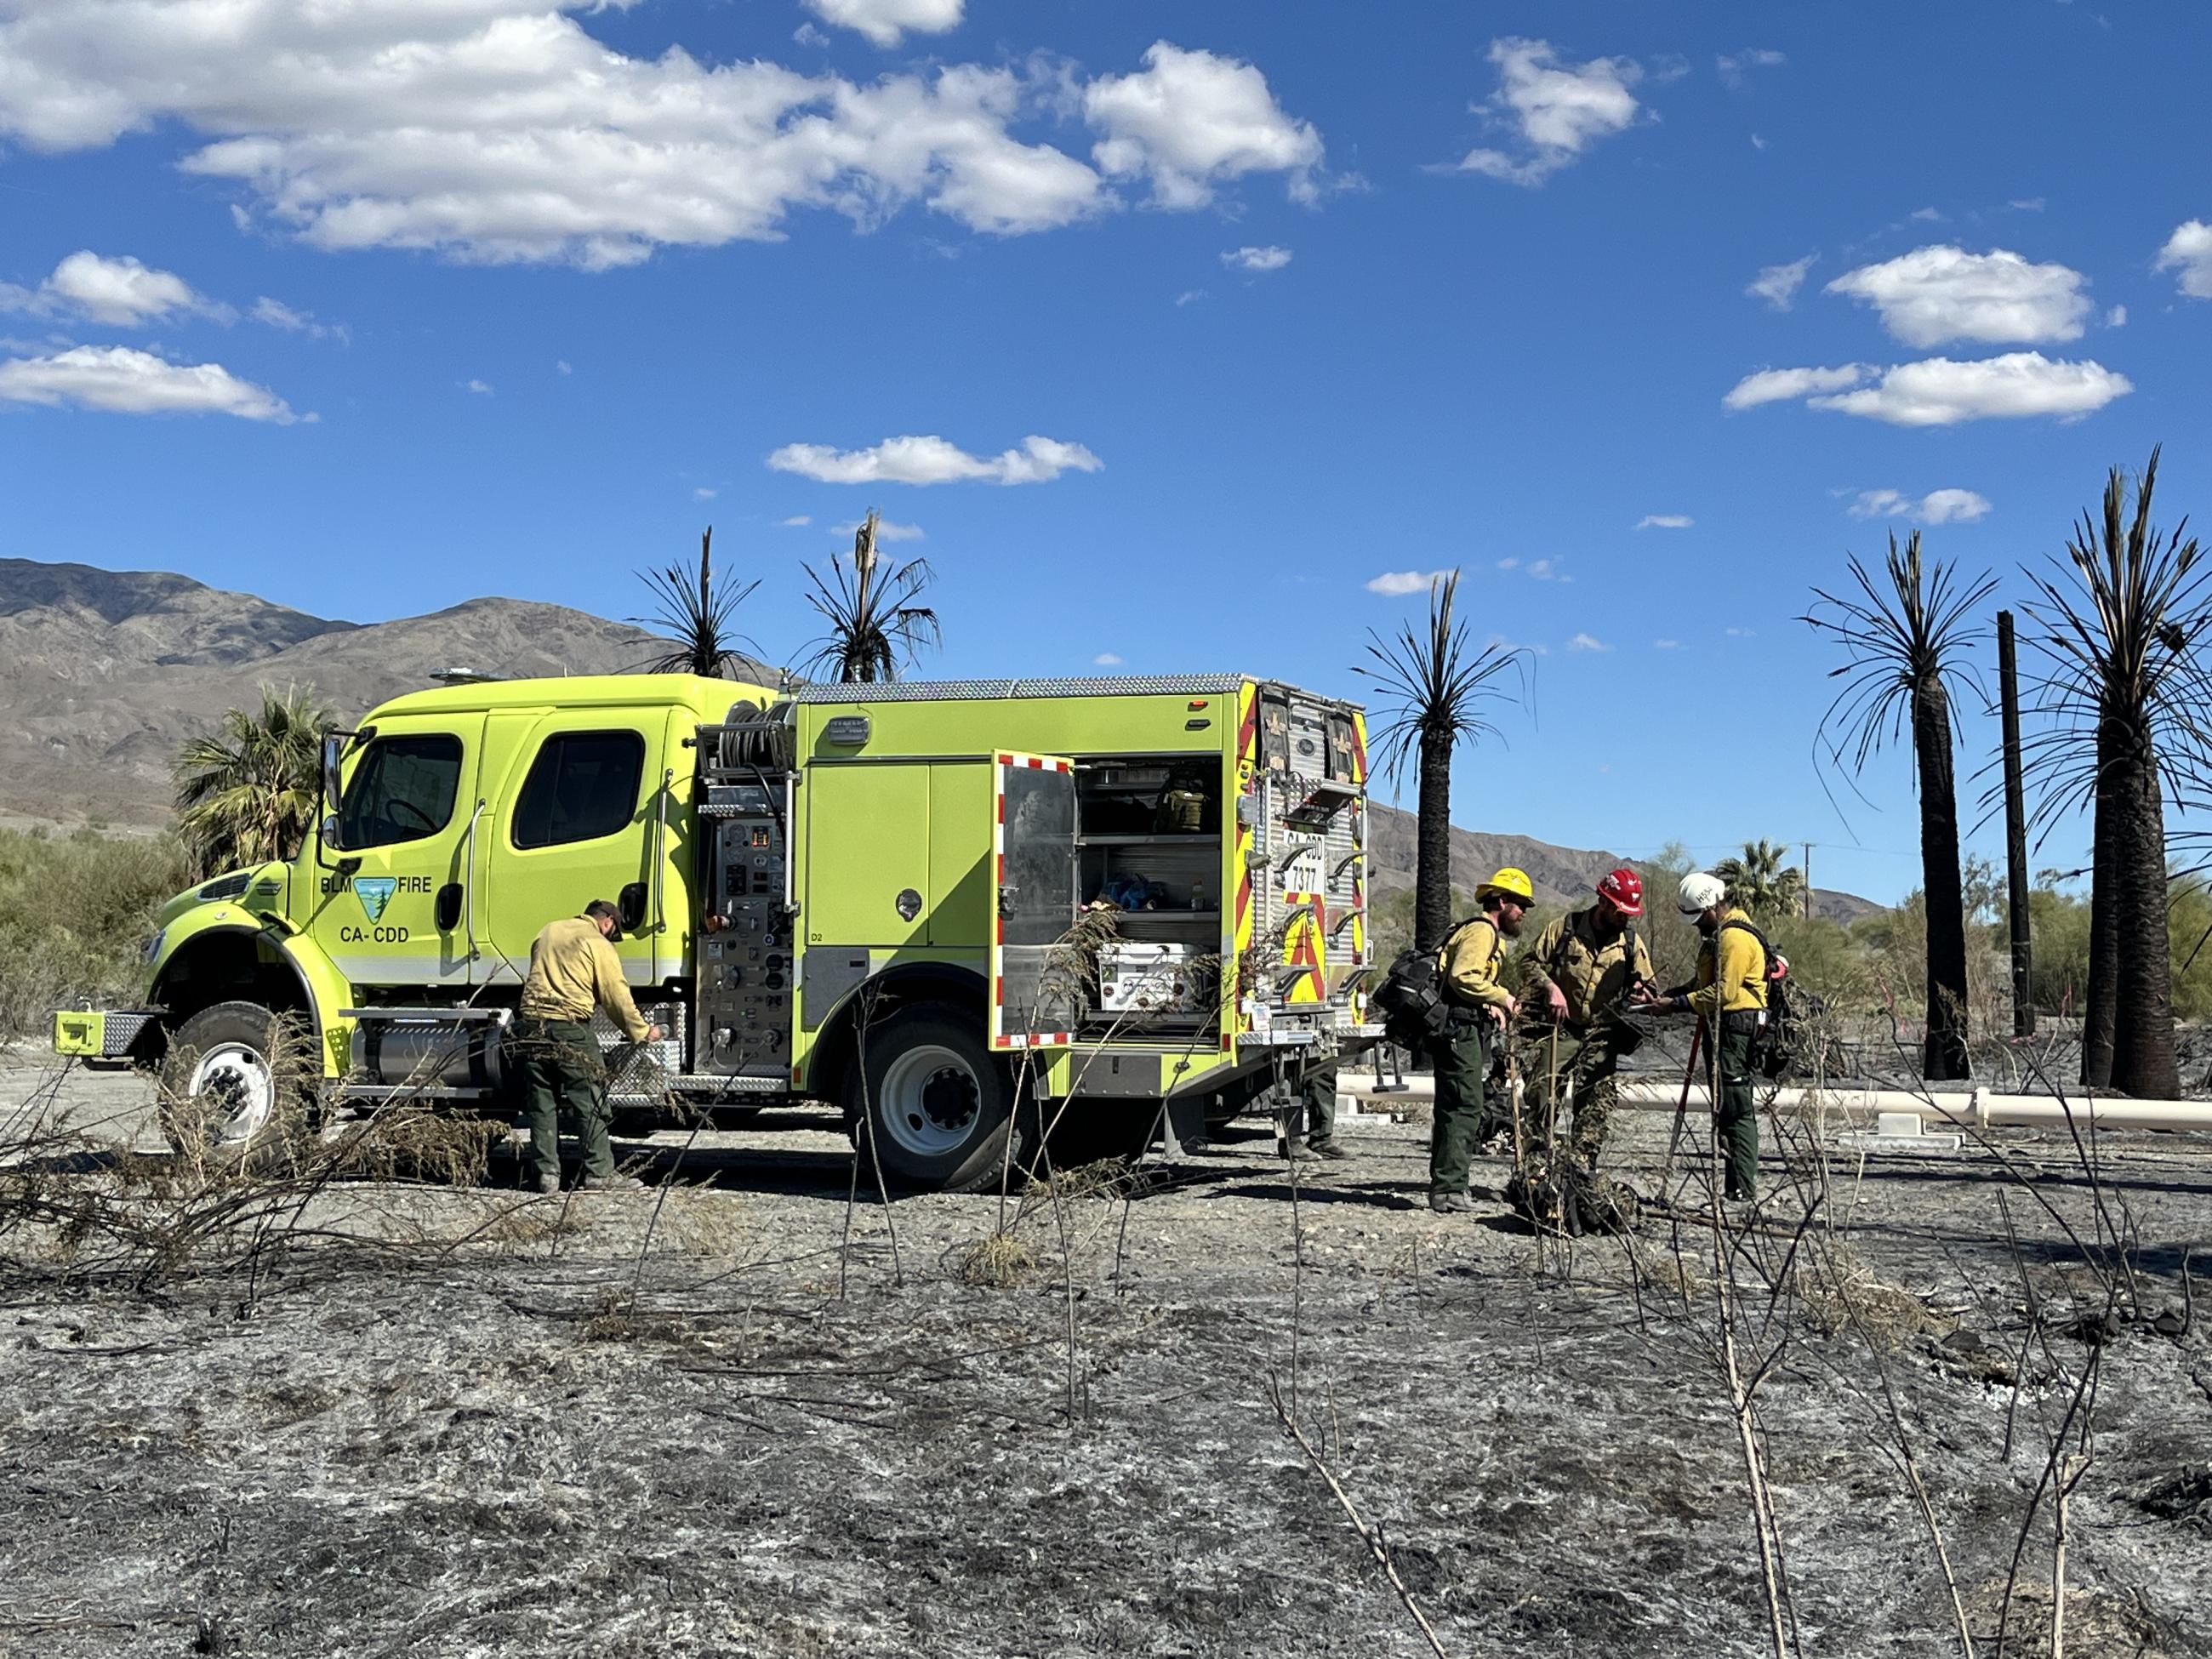 A BLM fire engine with firefighters standing nearby.